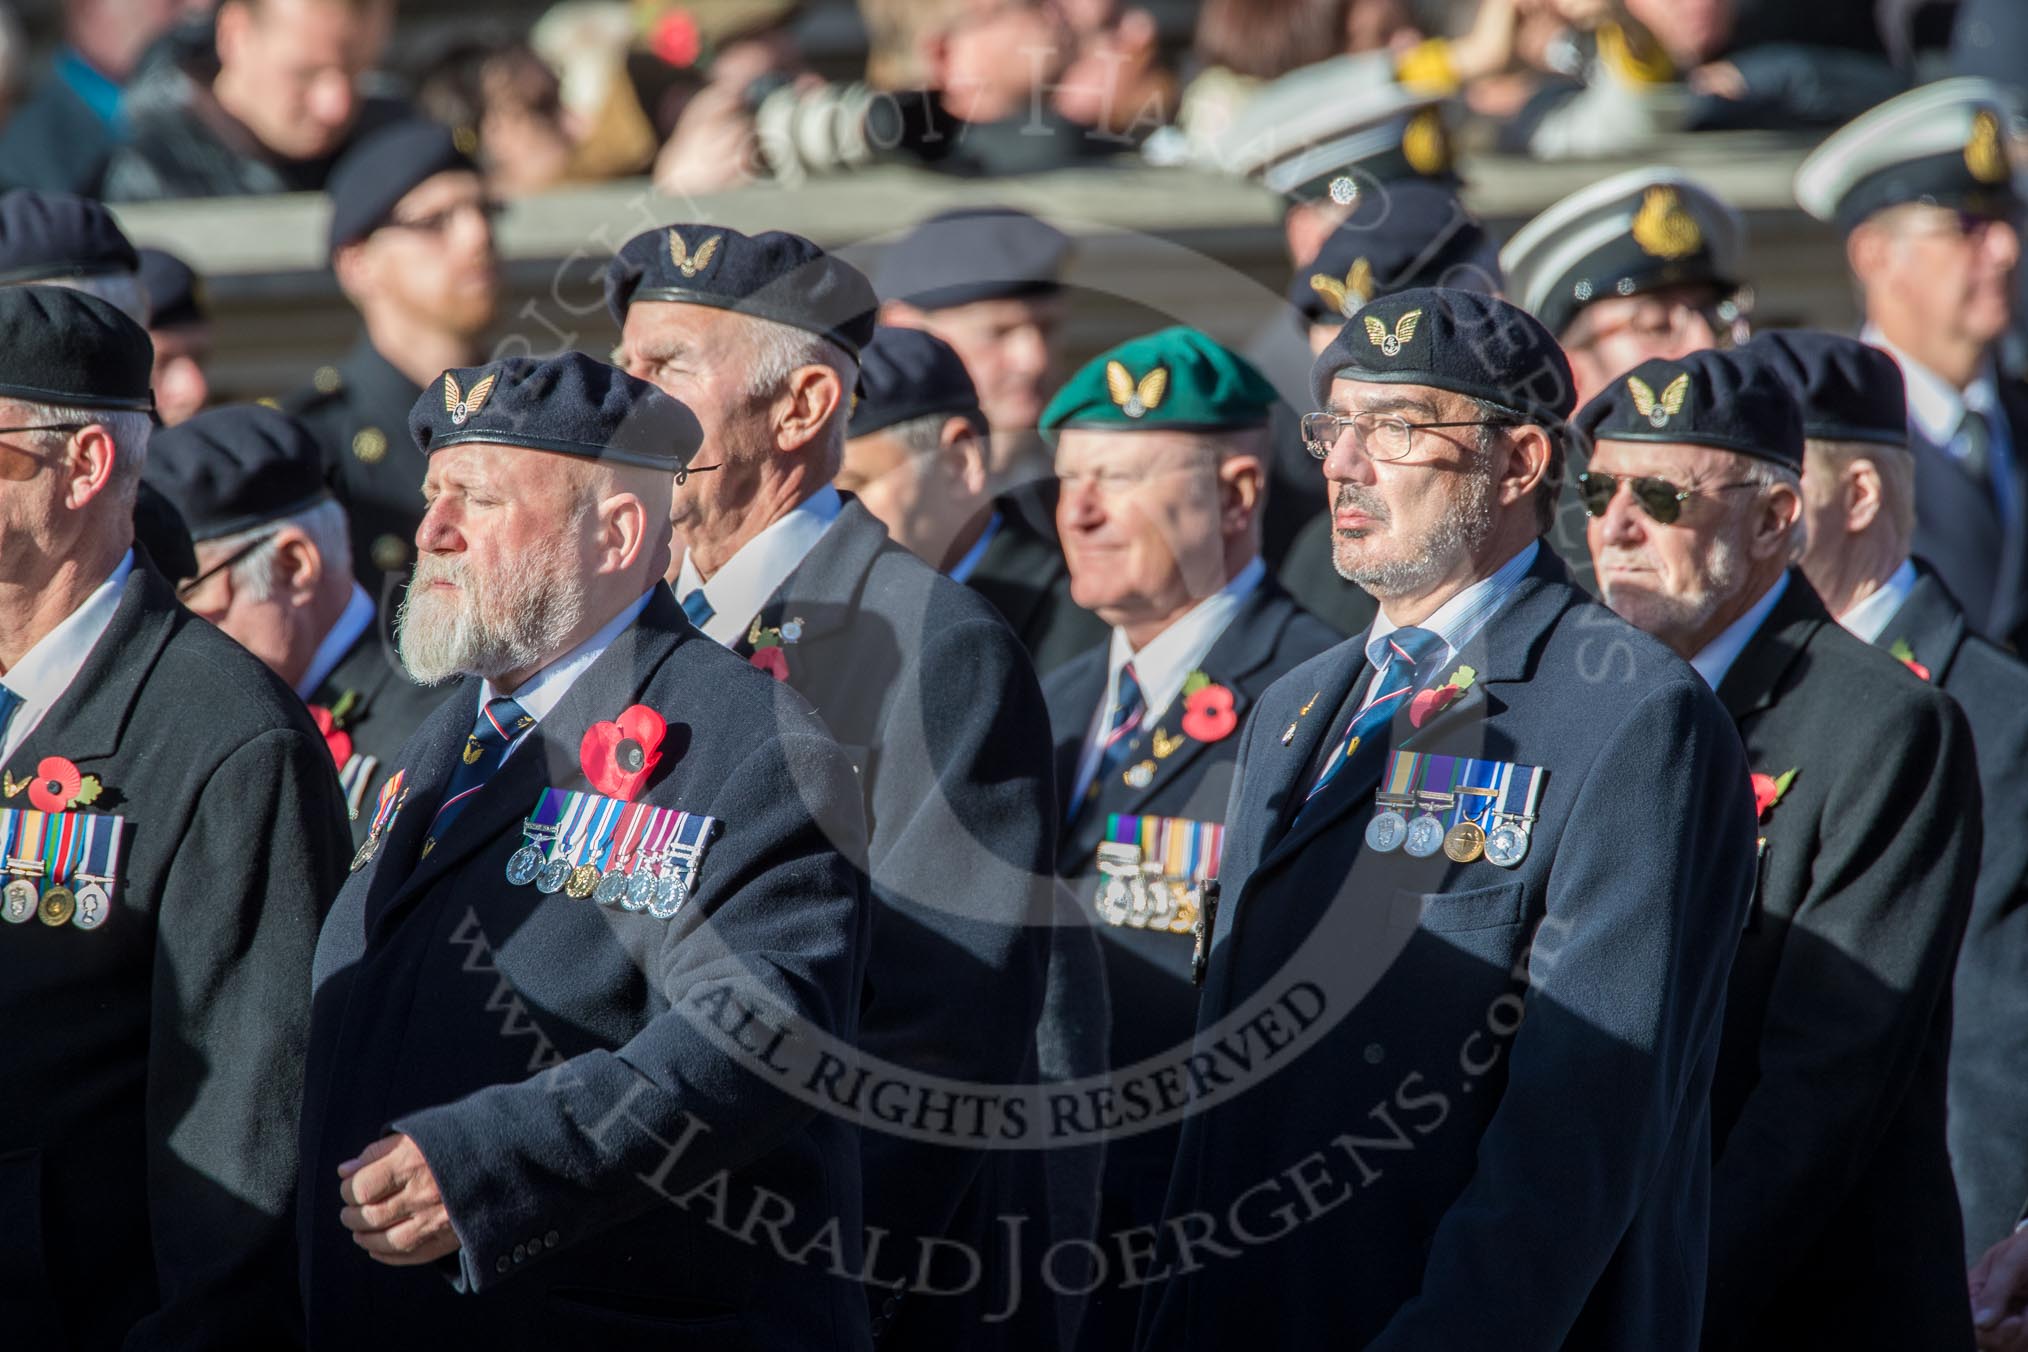 Aircrewmans Association  (Group E5, 44 members) during the Royal British Legion March Past on Remembrance Sunday at the Cenotaph, Whitehall, Westminster, London, 11 November 2018, 11:42.